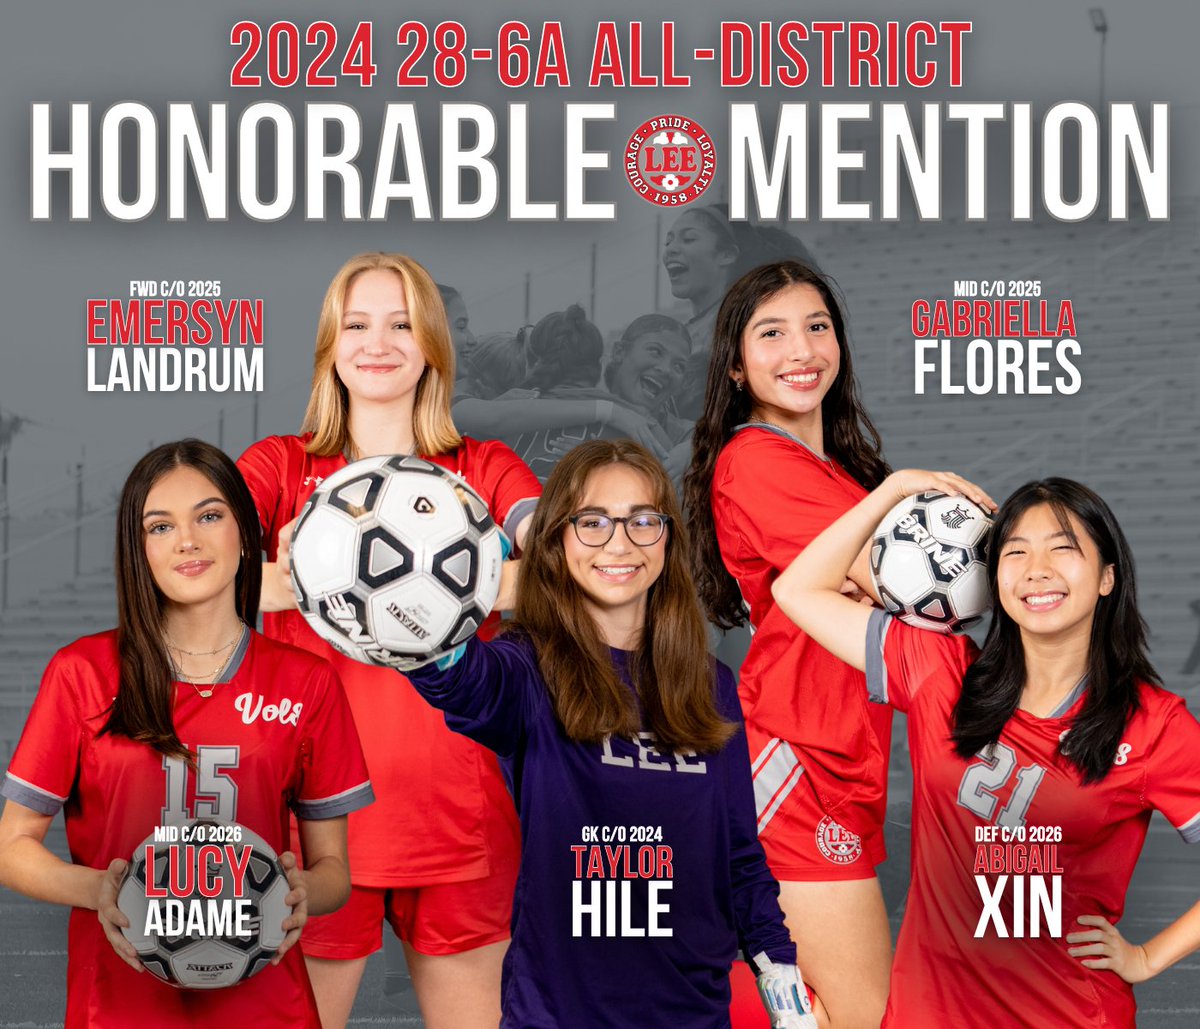 Congratulations to these Vols for their 2024 28-6A All-District Honorable Mention nod! #GoVols